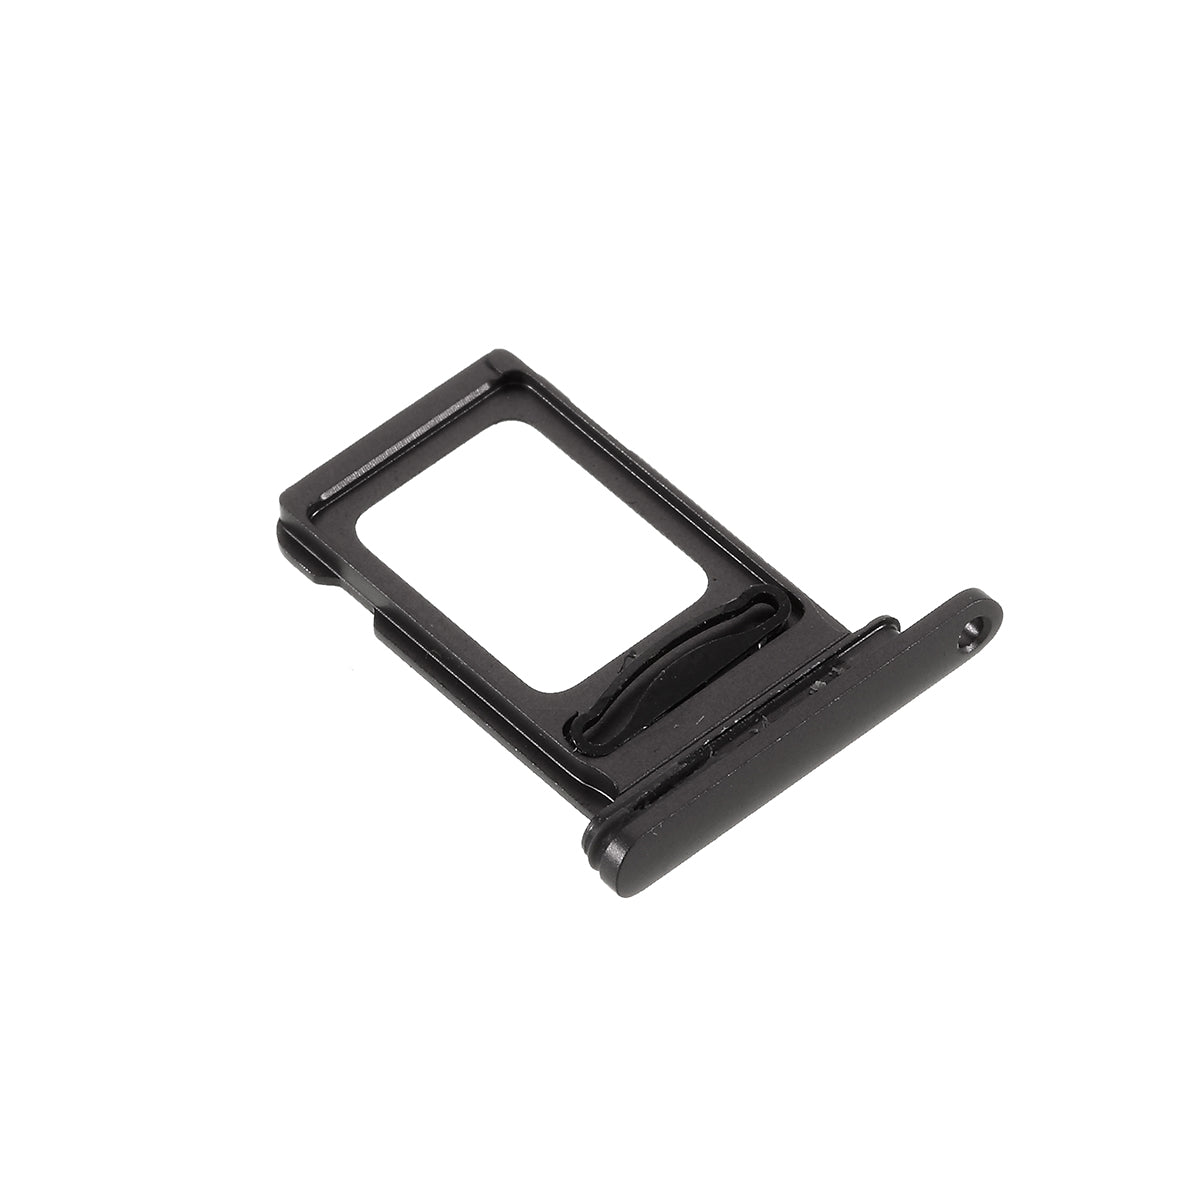 OEM Dual SIM Card Tray Holder Replace Part for iPhone 11 - Black